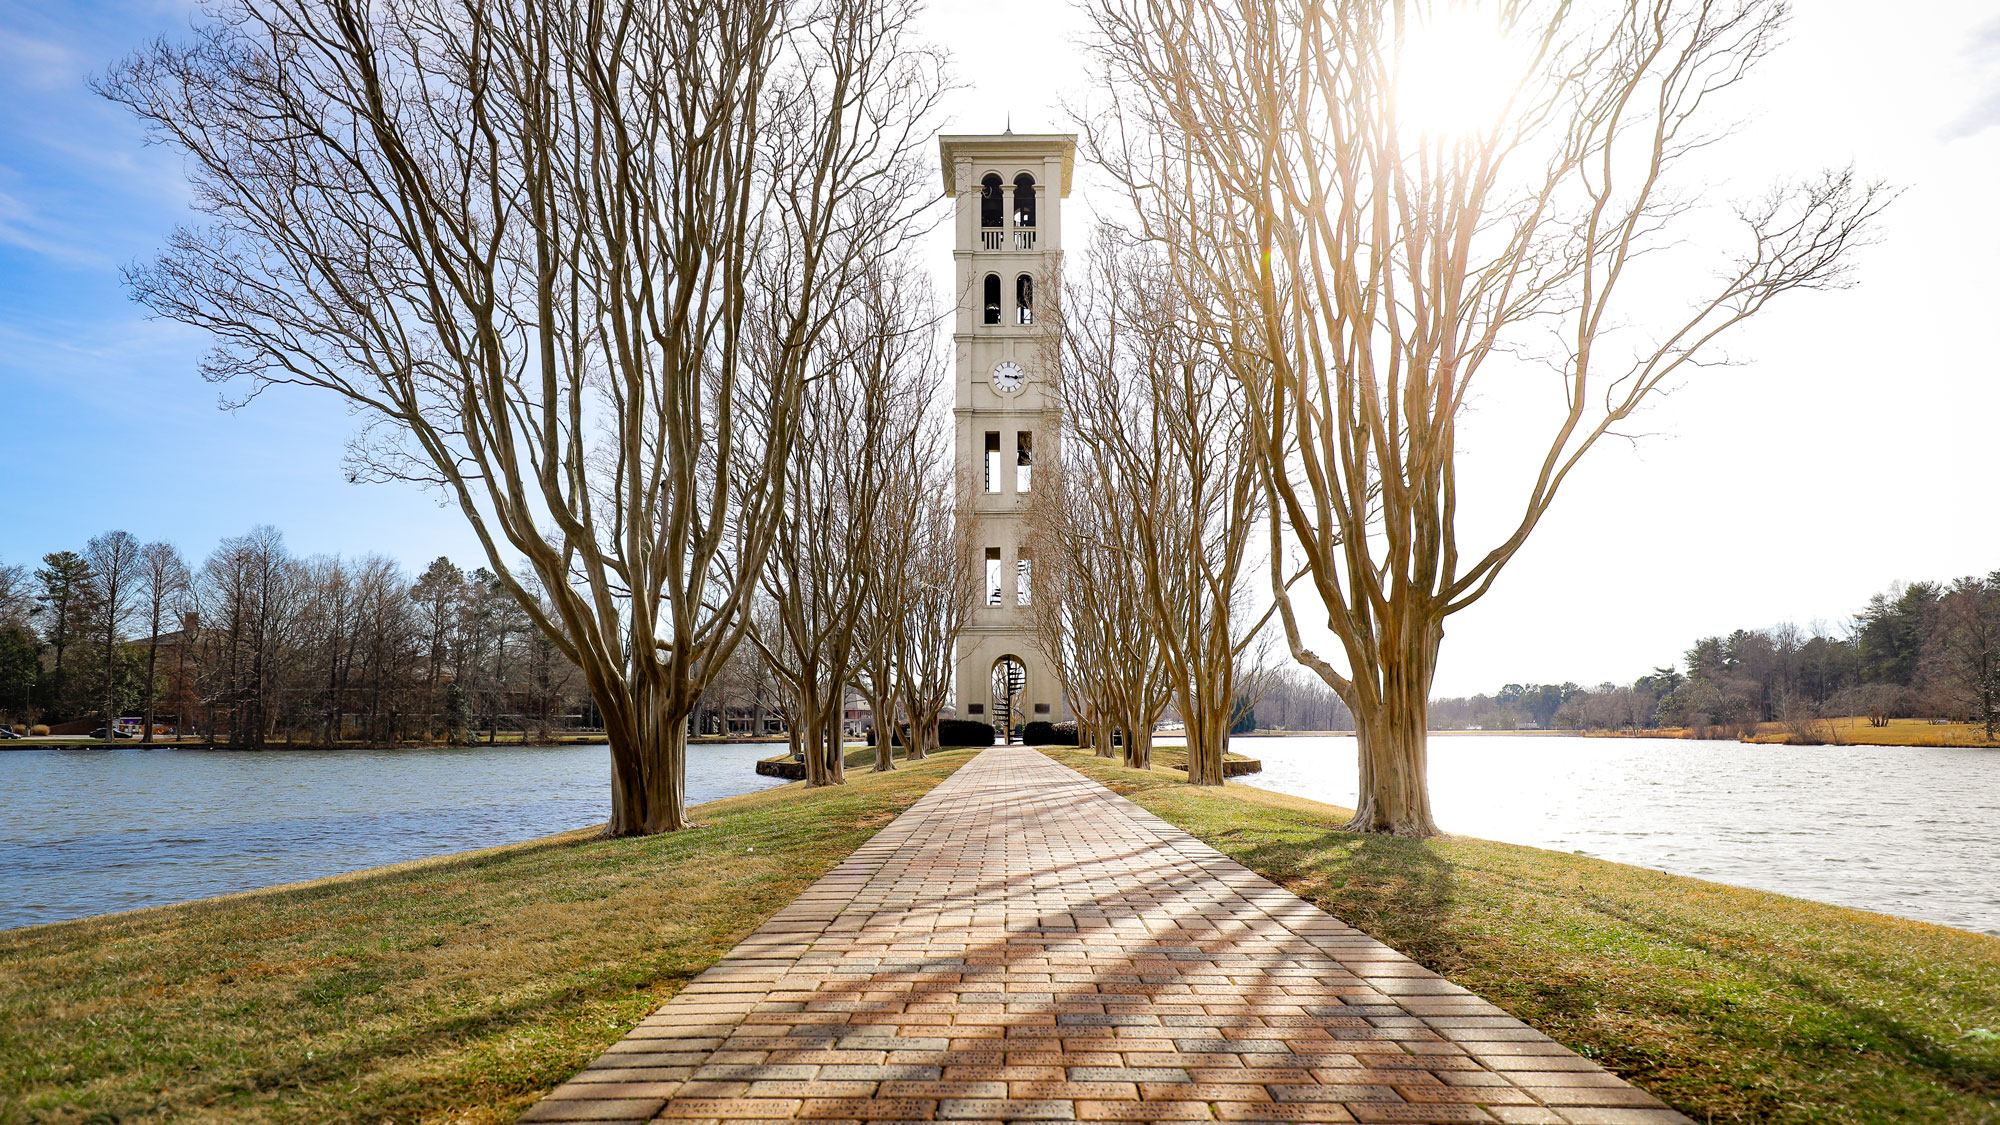 Bell tower from afar, lake in rear